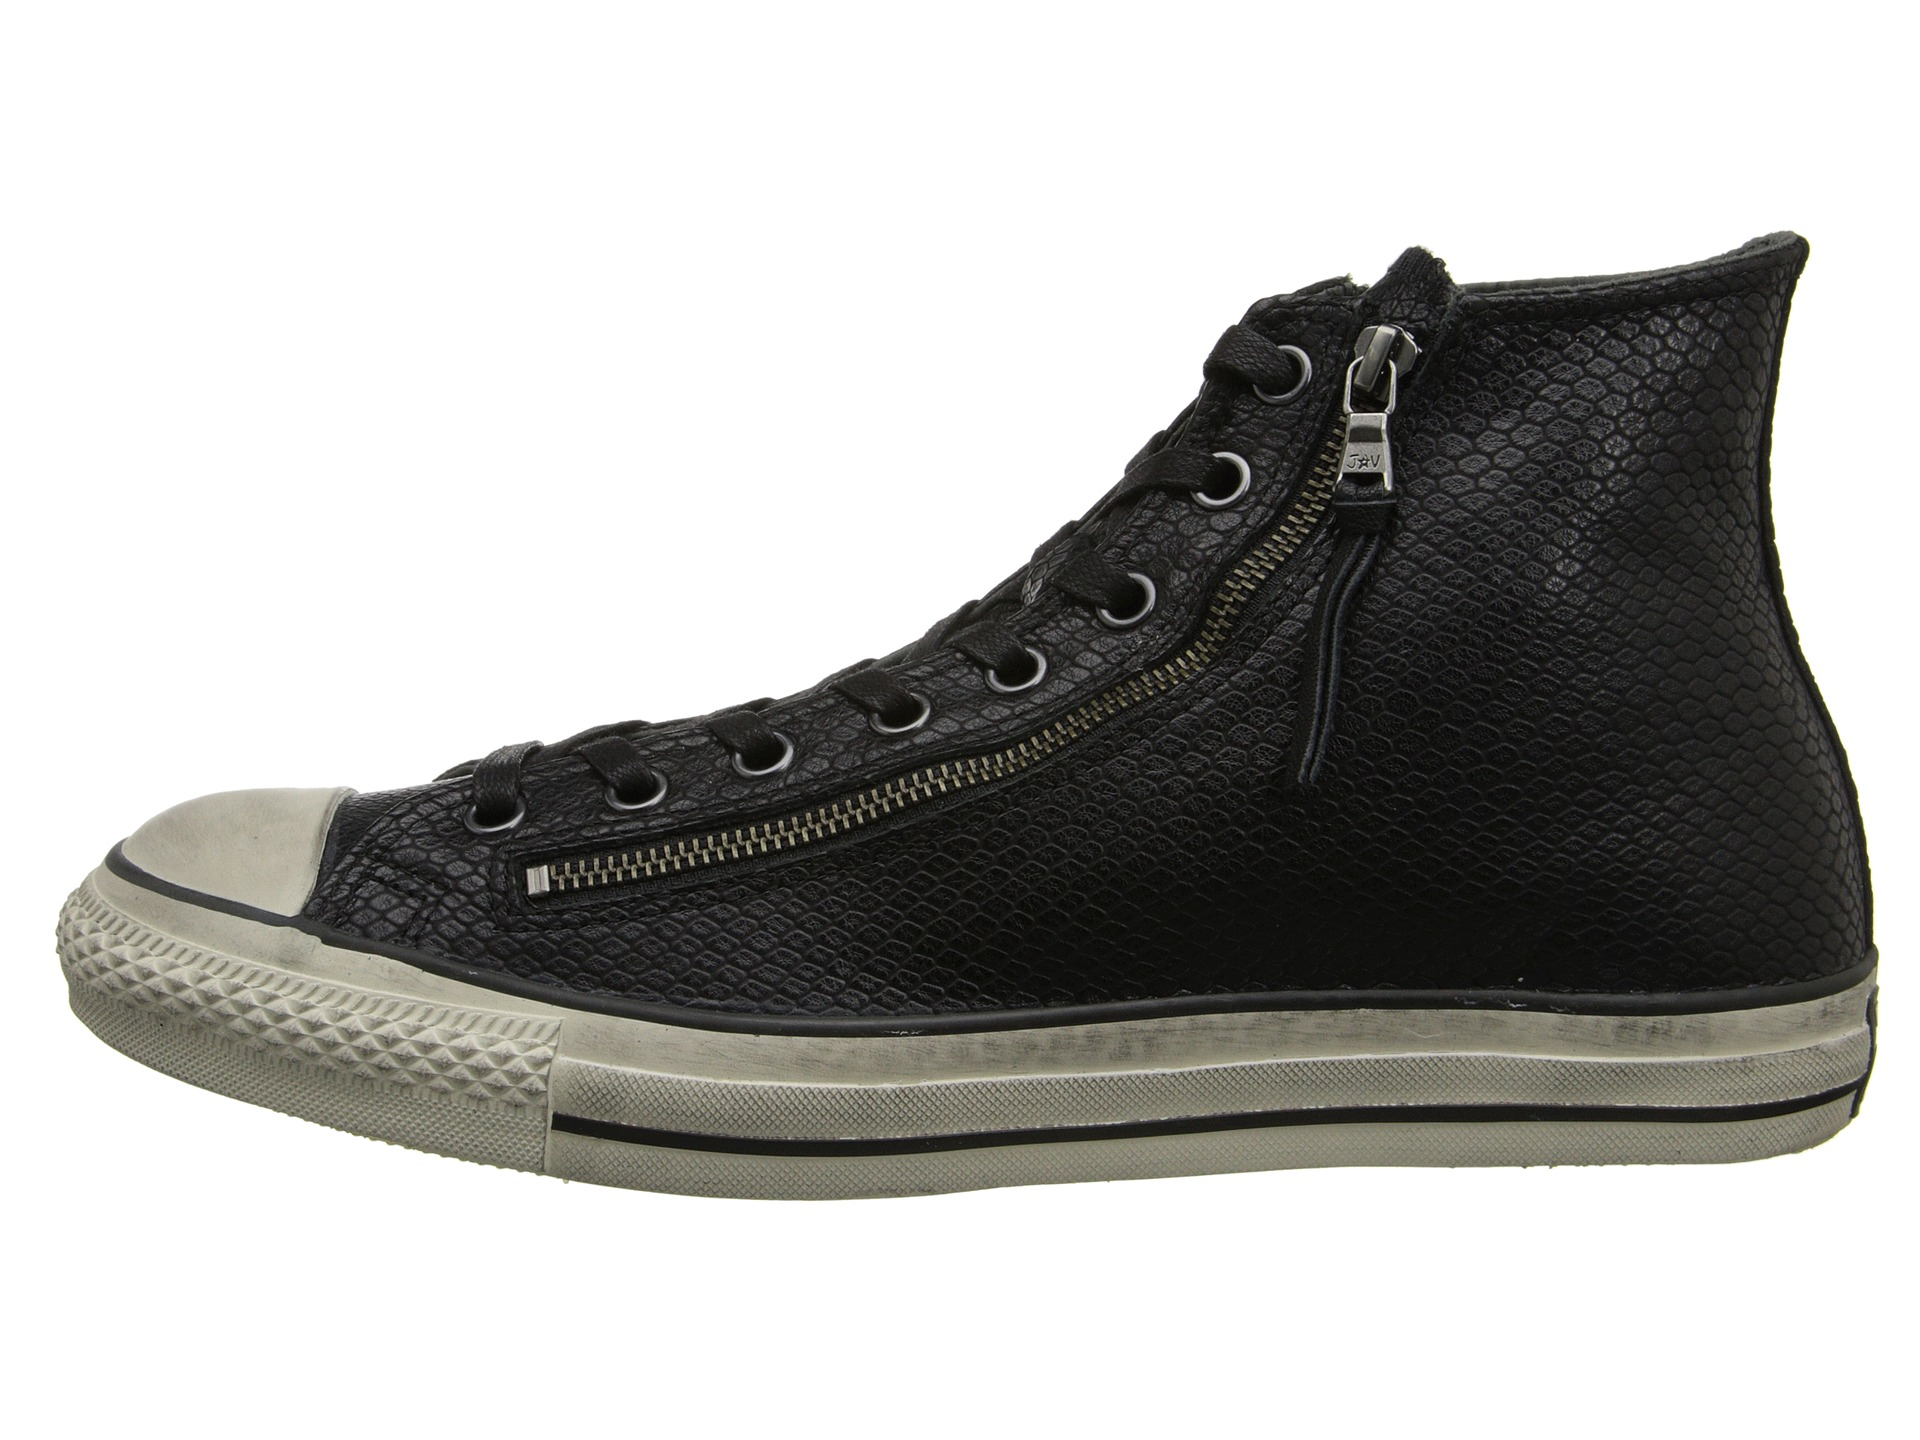 Converse Chuck Taylor All Star Leather Double Zip Black Snake - Lyst